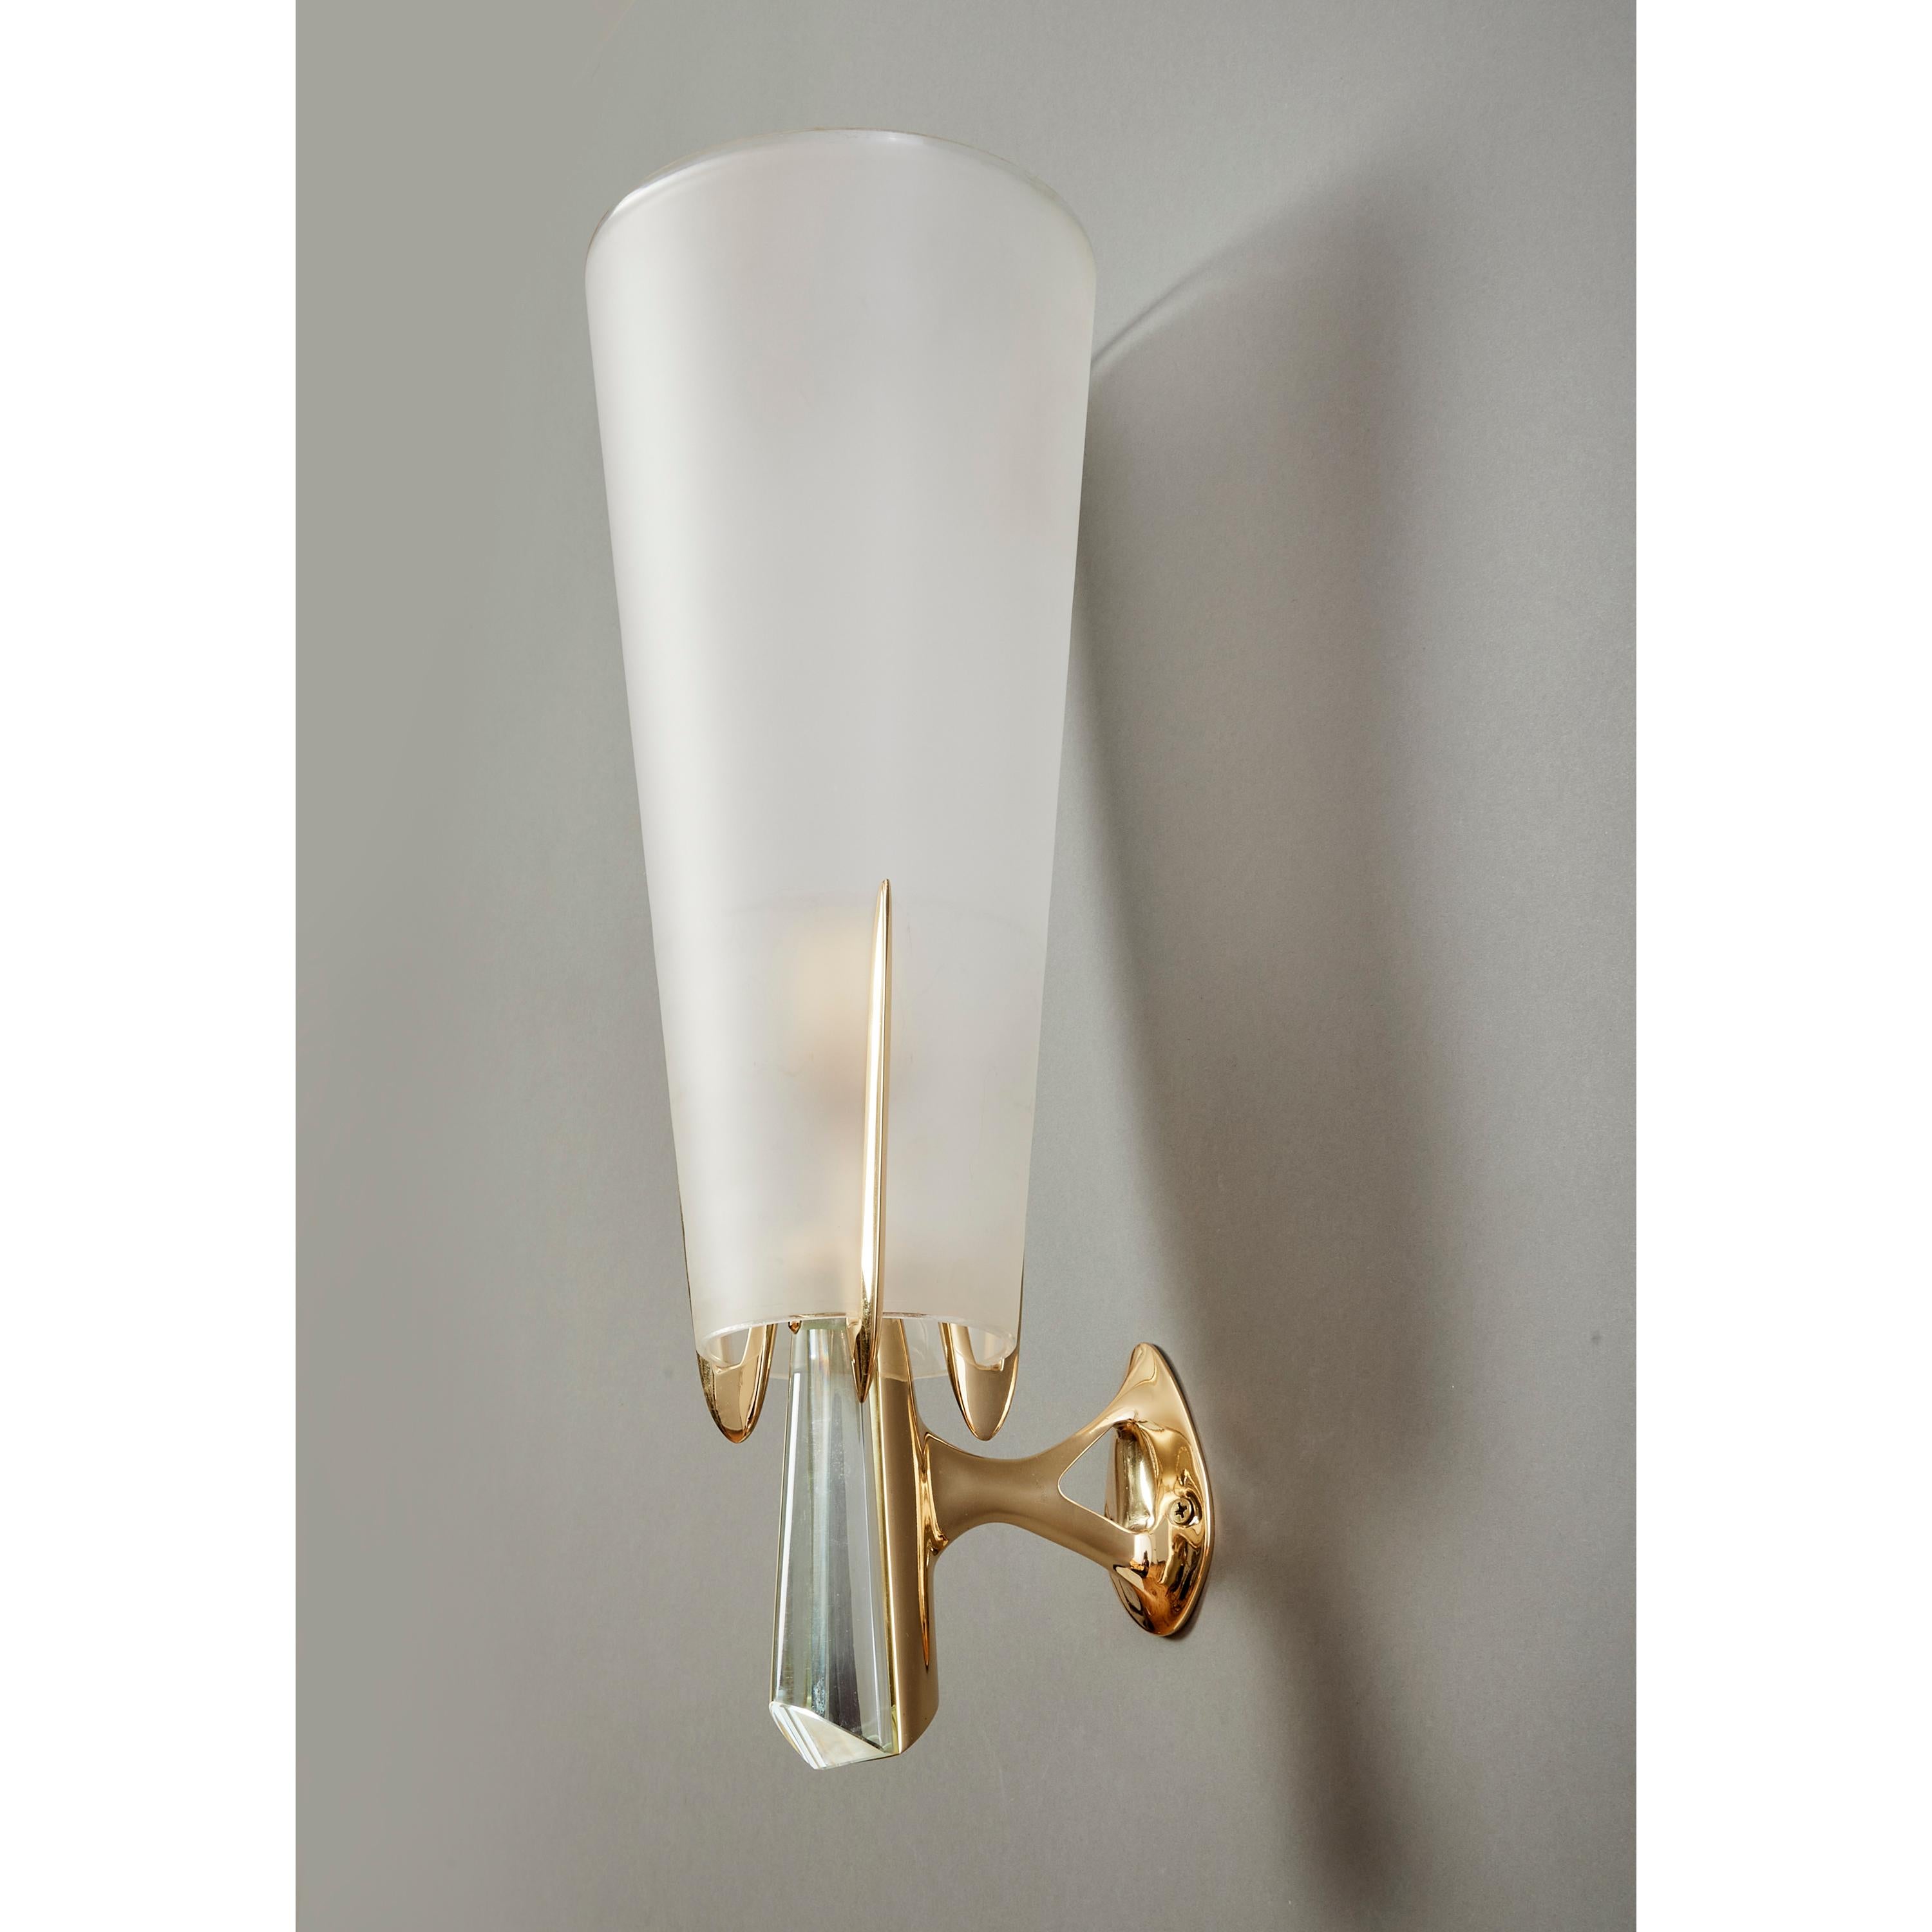 Max Ingrand for Fontana Arte: Rare Sconces in Brass and Crystal, Italy 1955 For Sale 2